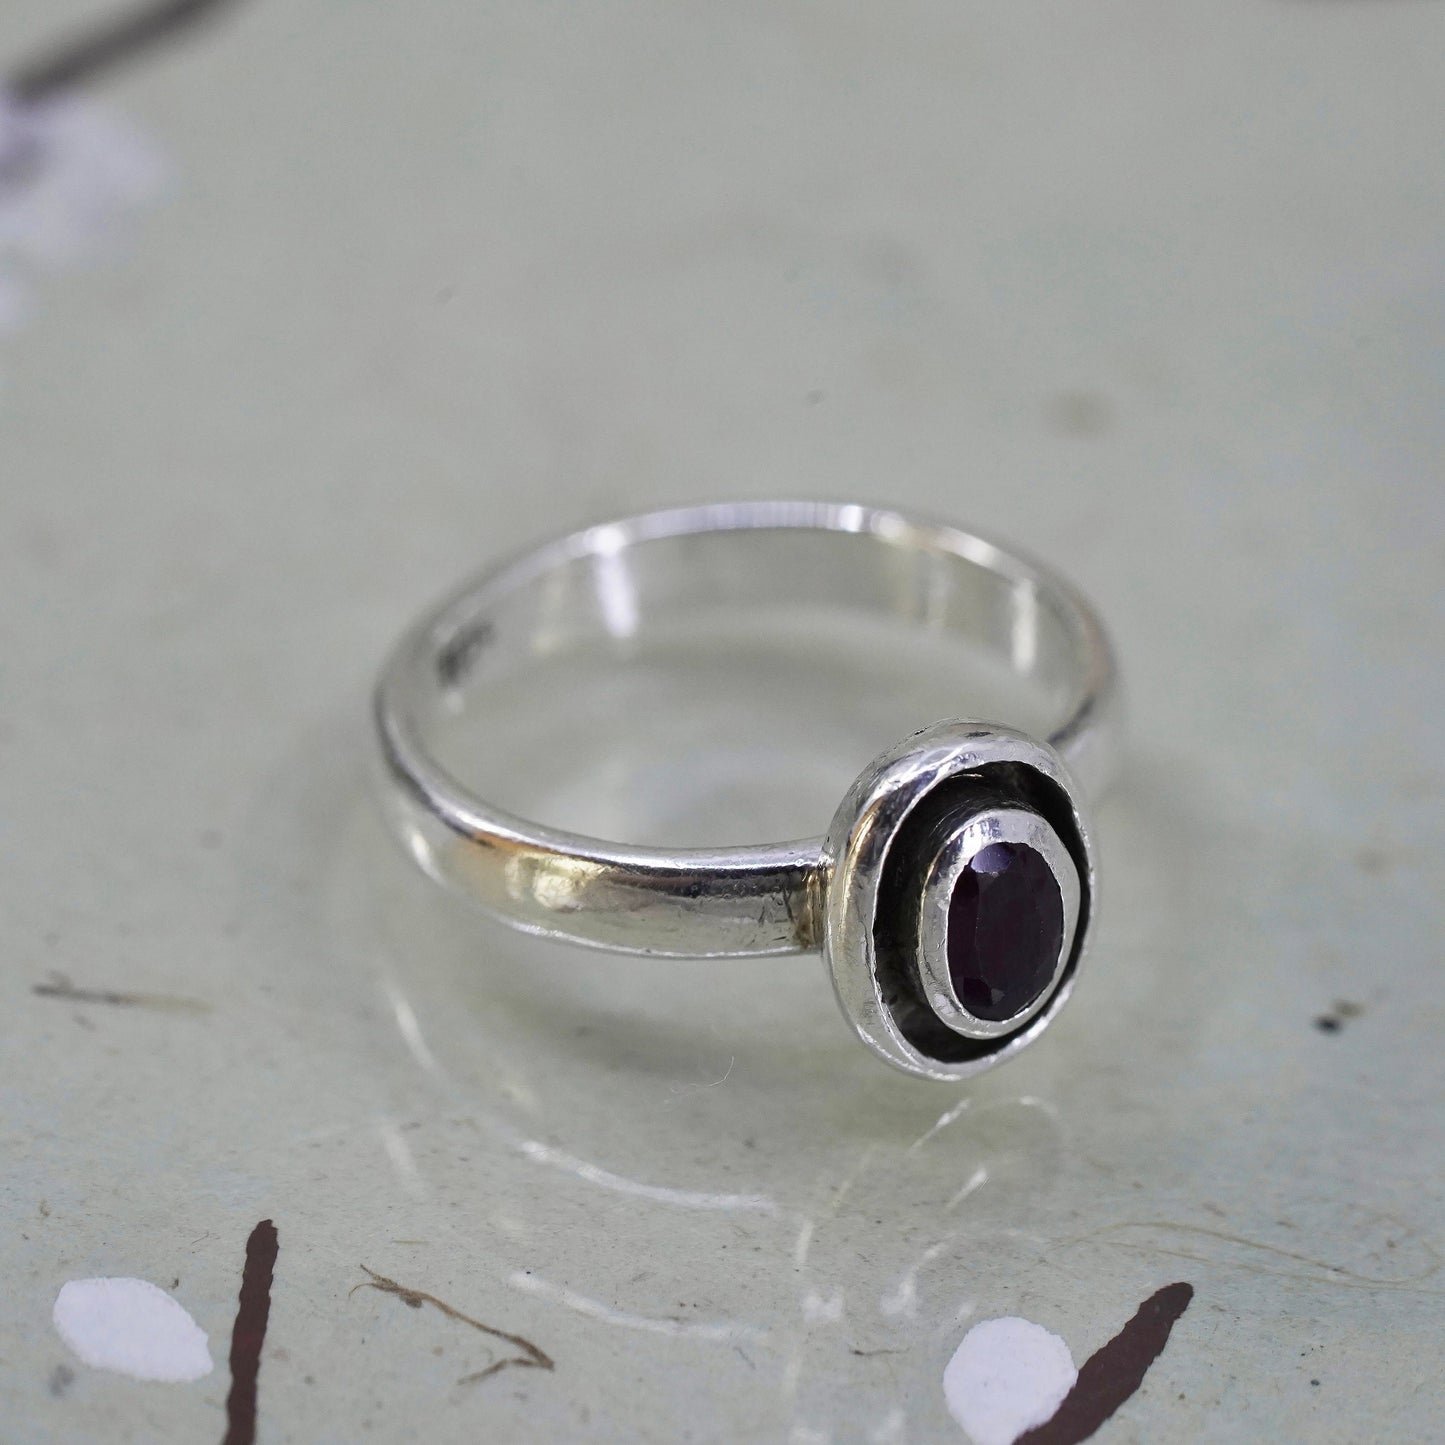 Size 8, vintage simple sterling 925 silver handmade ring with garnet